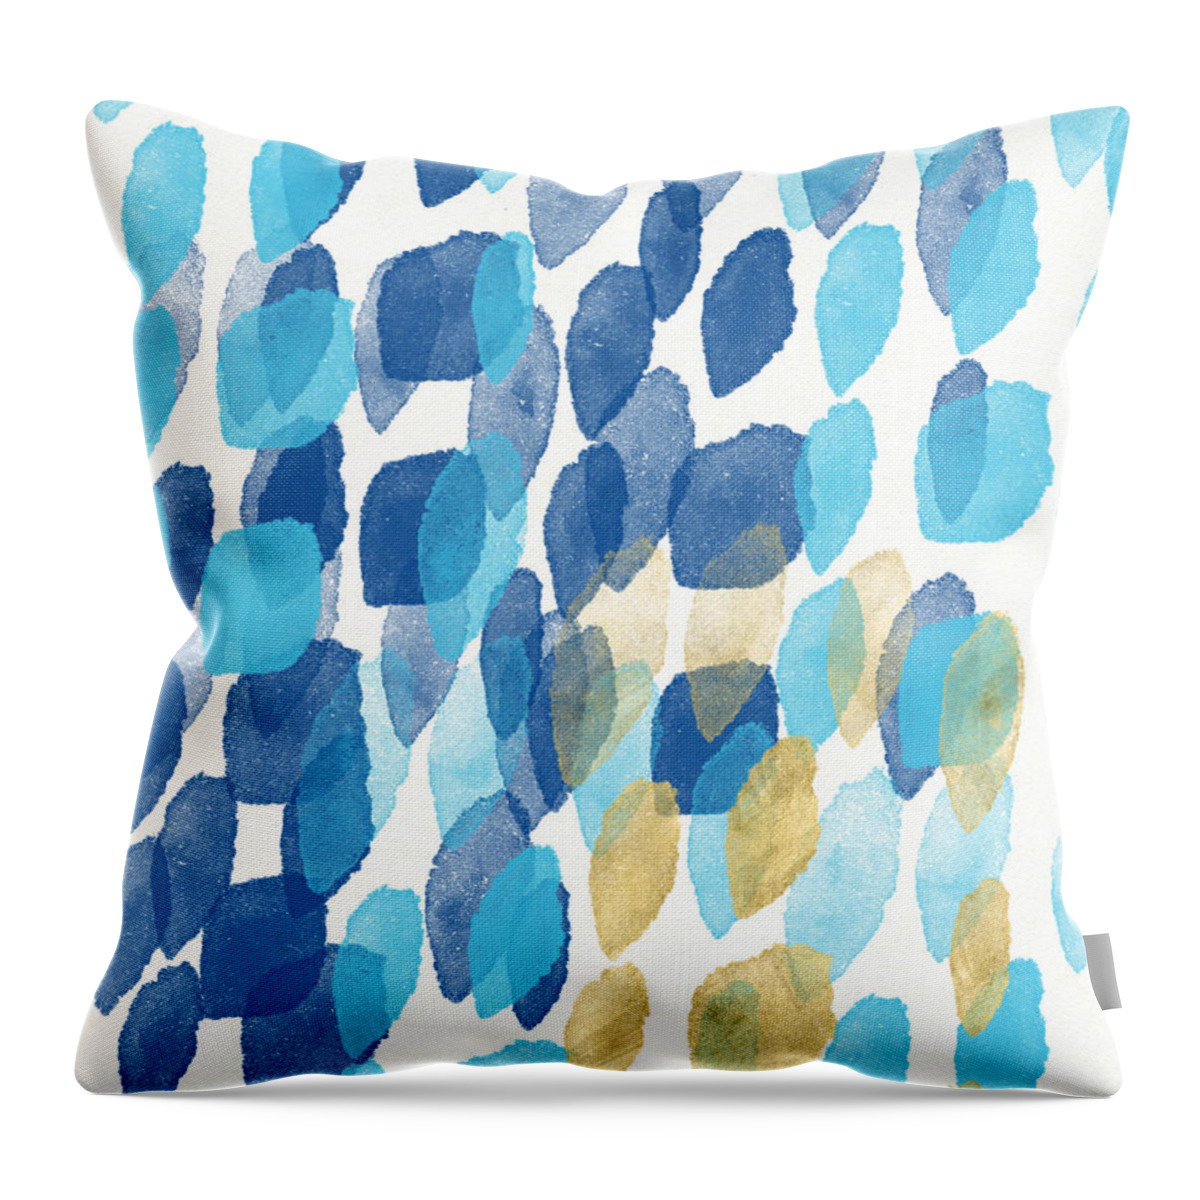 Water Throw Pillow featuring the painting Waterfall- Abstract Art by Linda Woods by Linda Woods